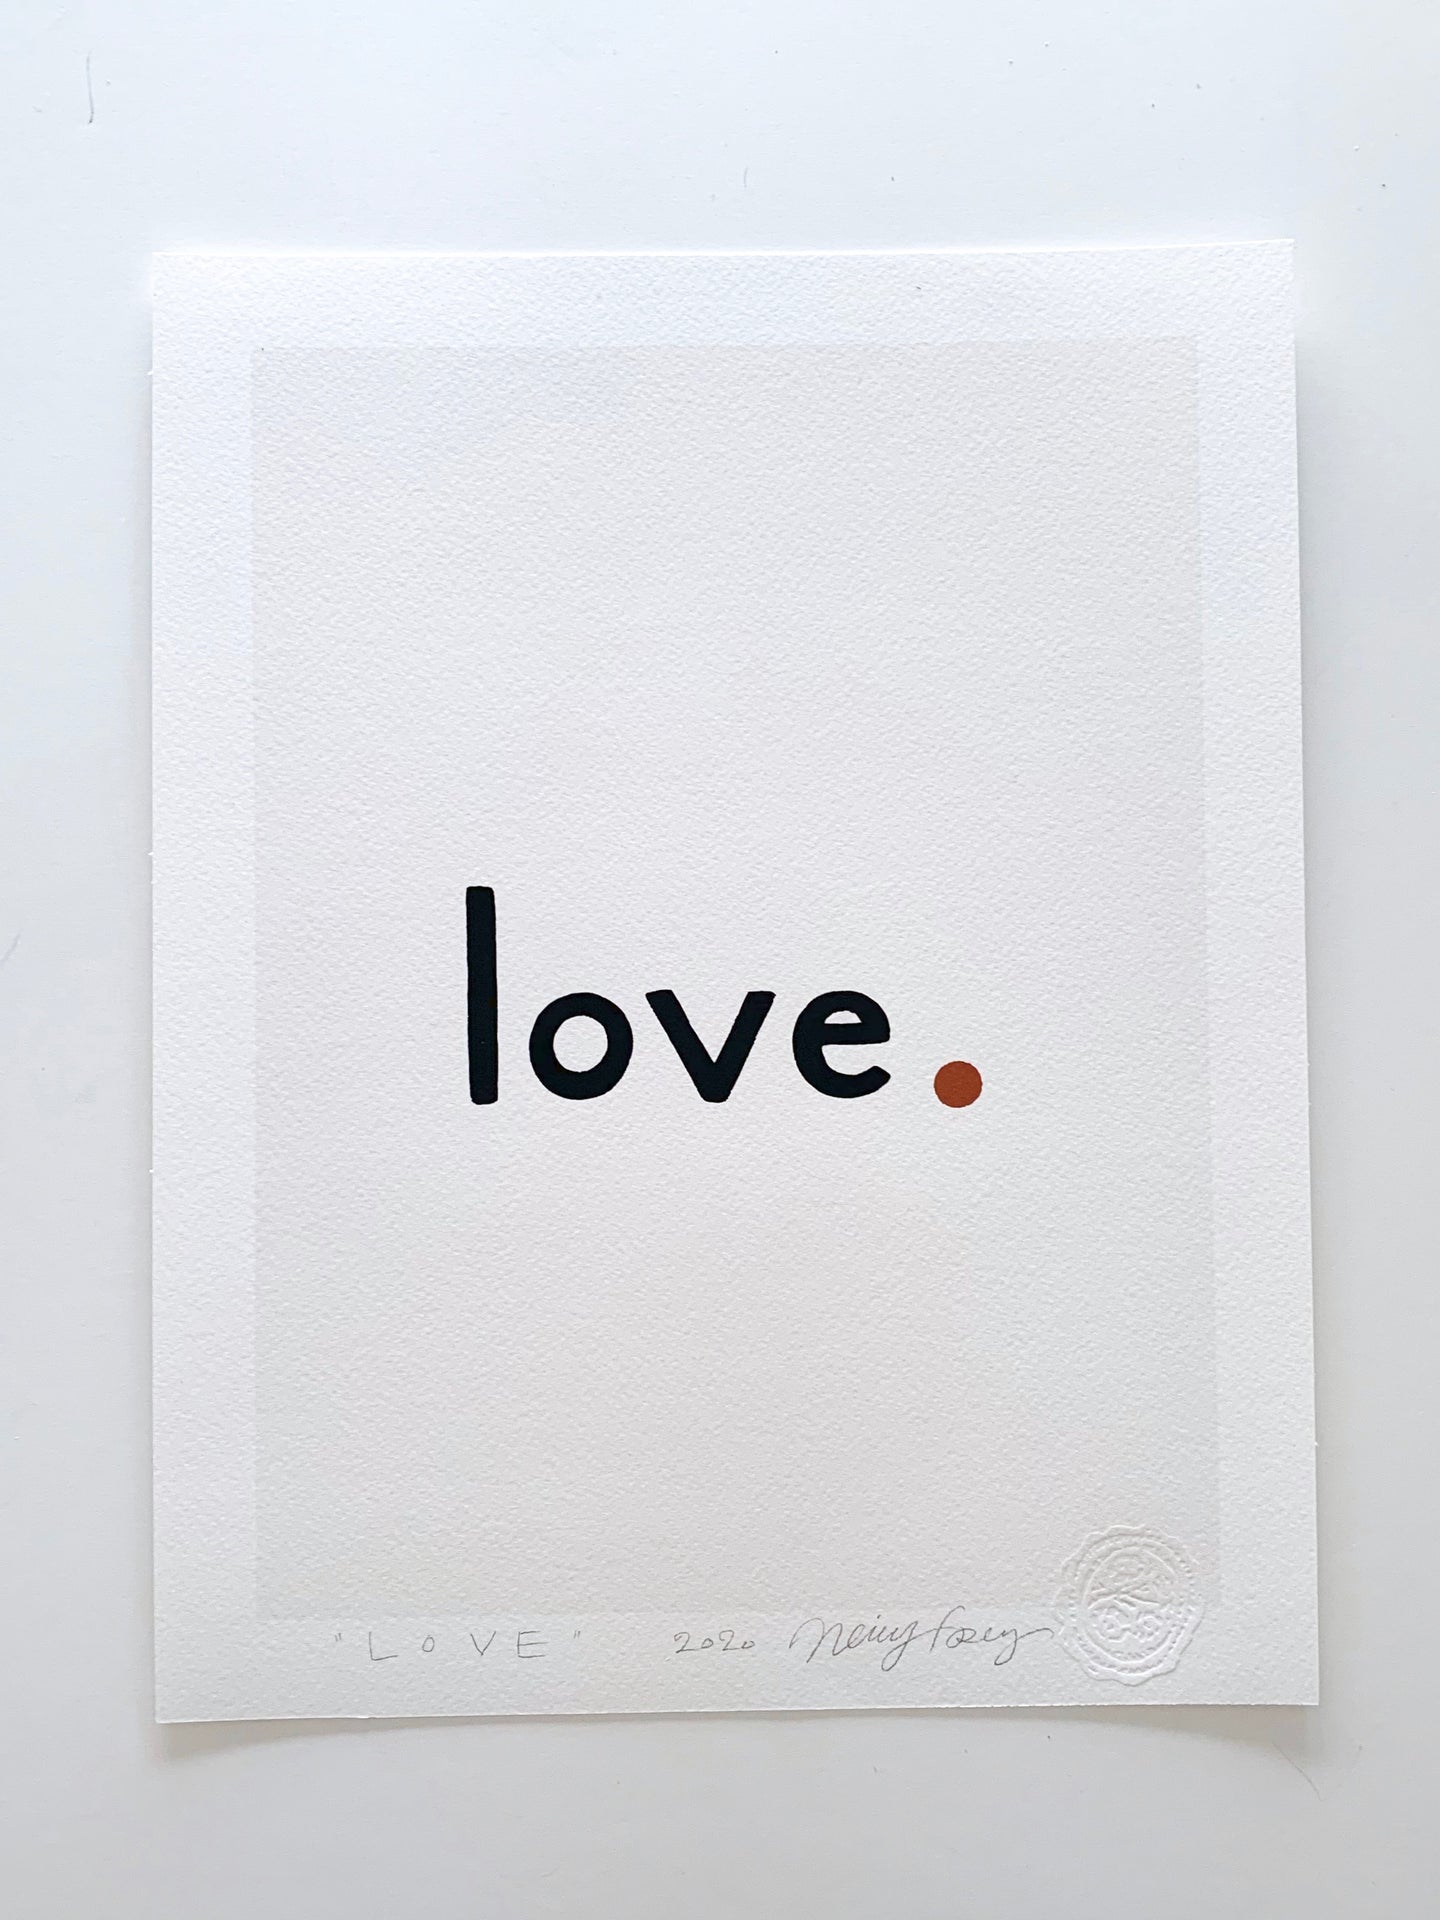 The Love Print 8.5 x 11 Giclee on paper